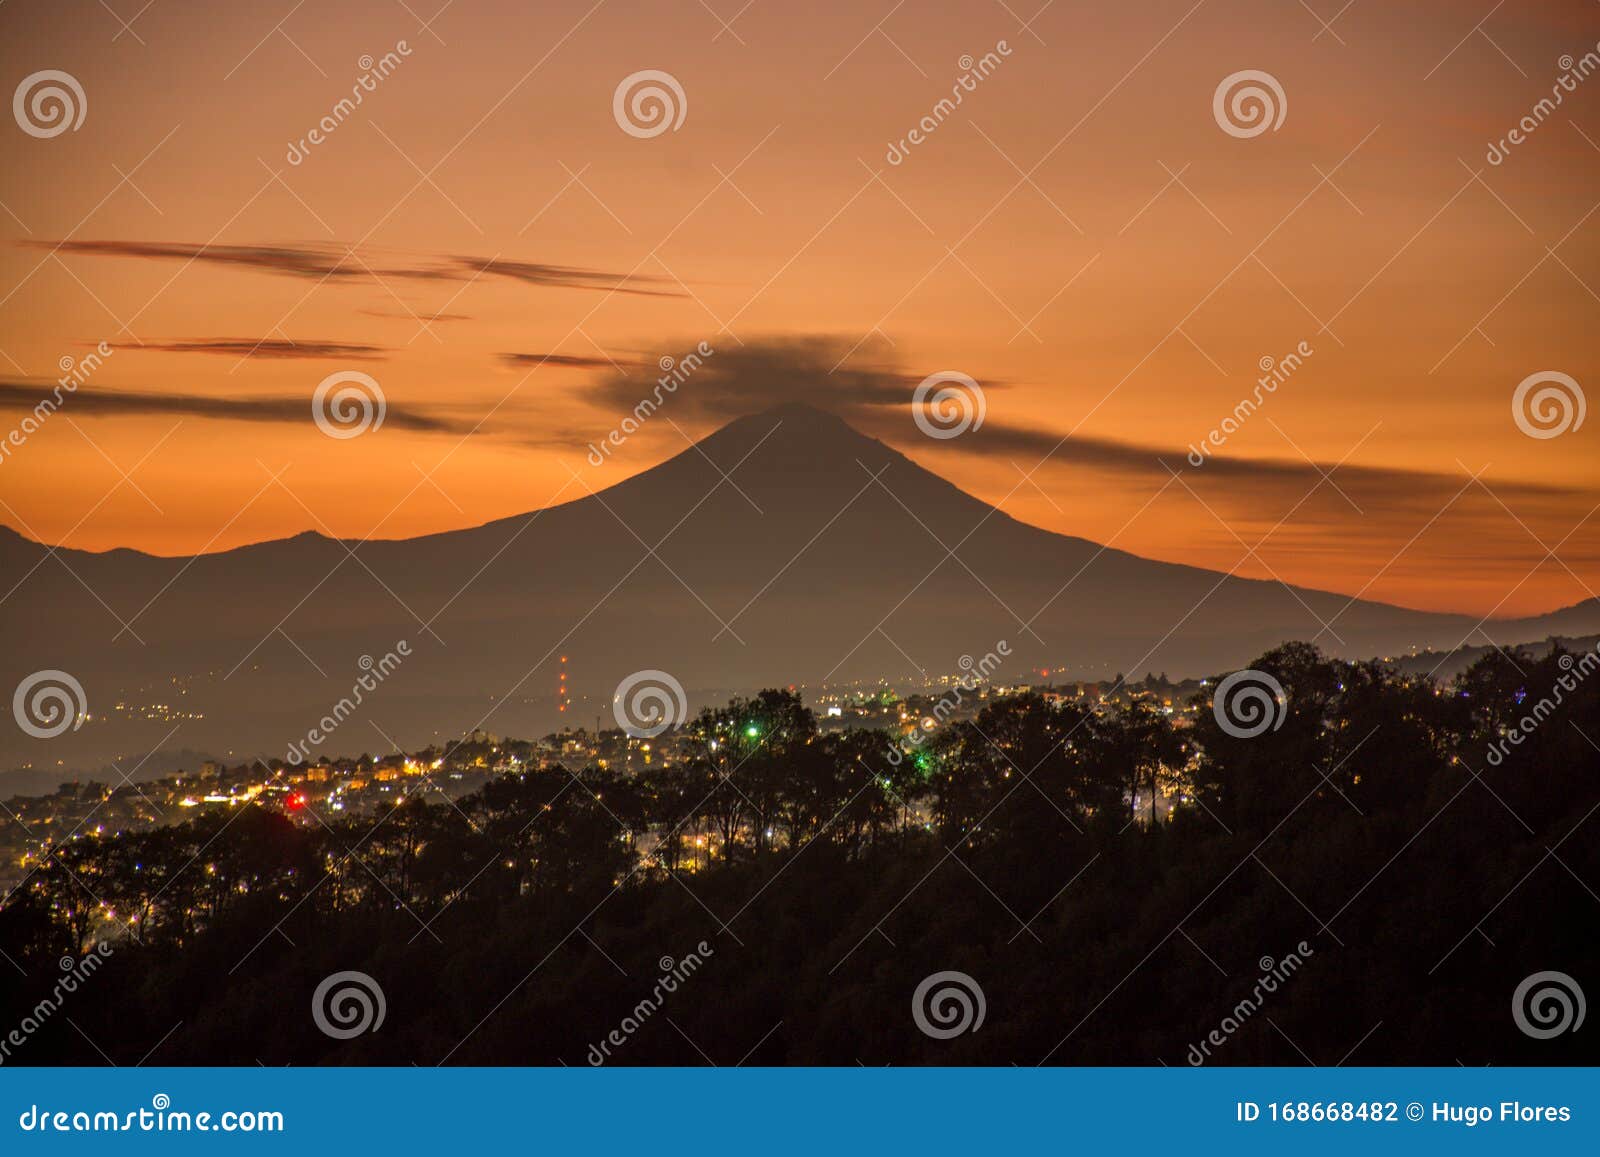 volcano cone with sunrise colors